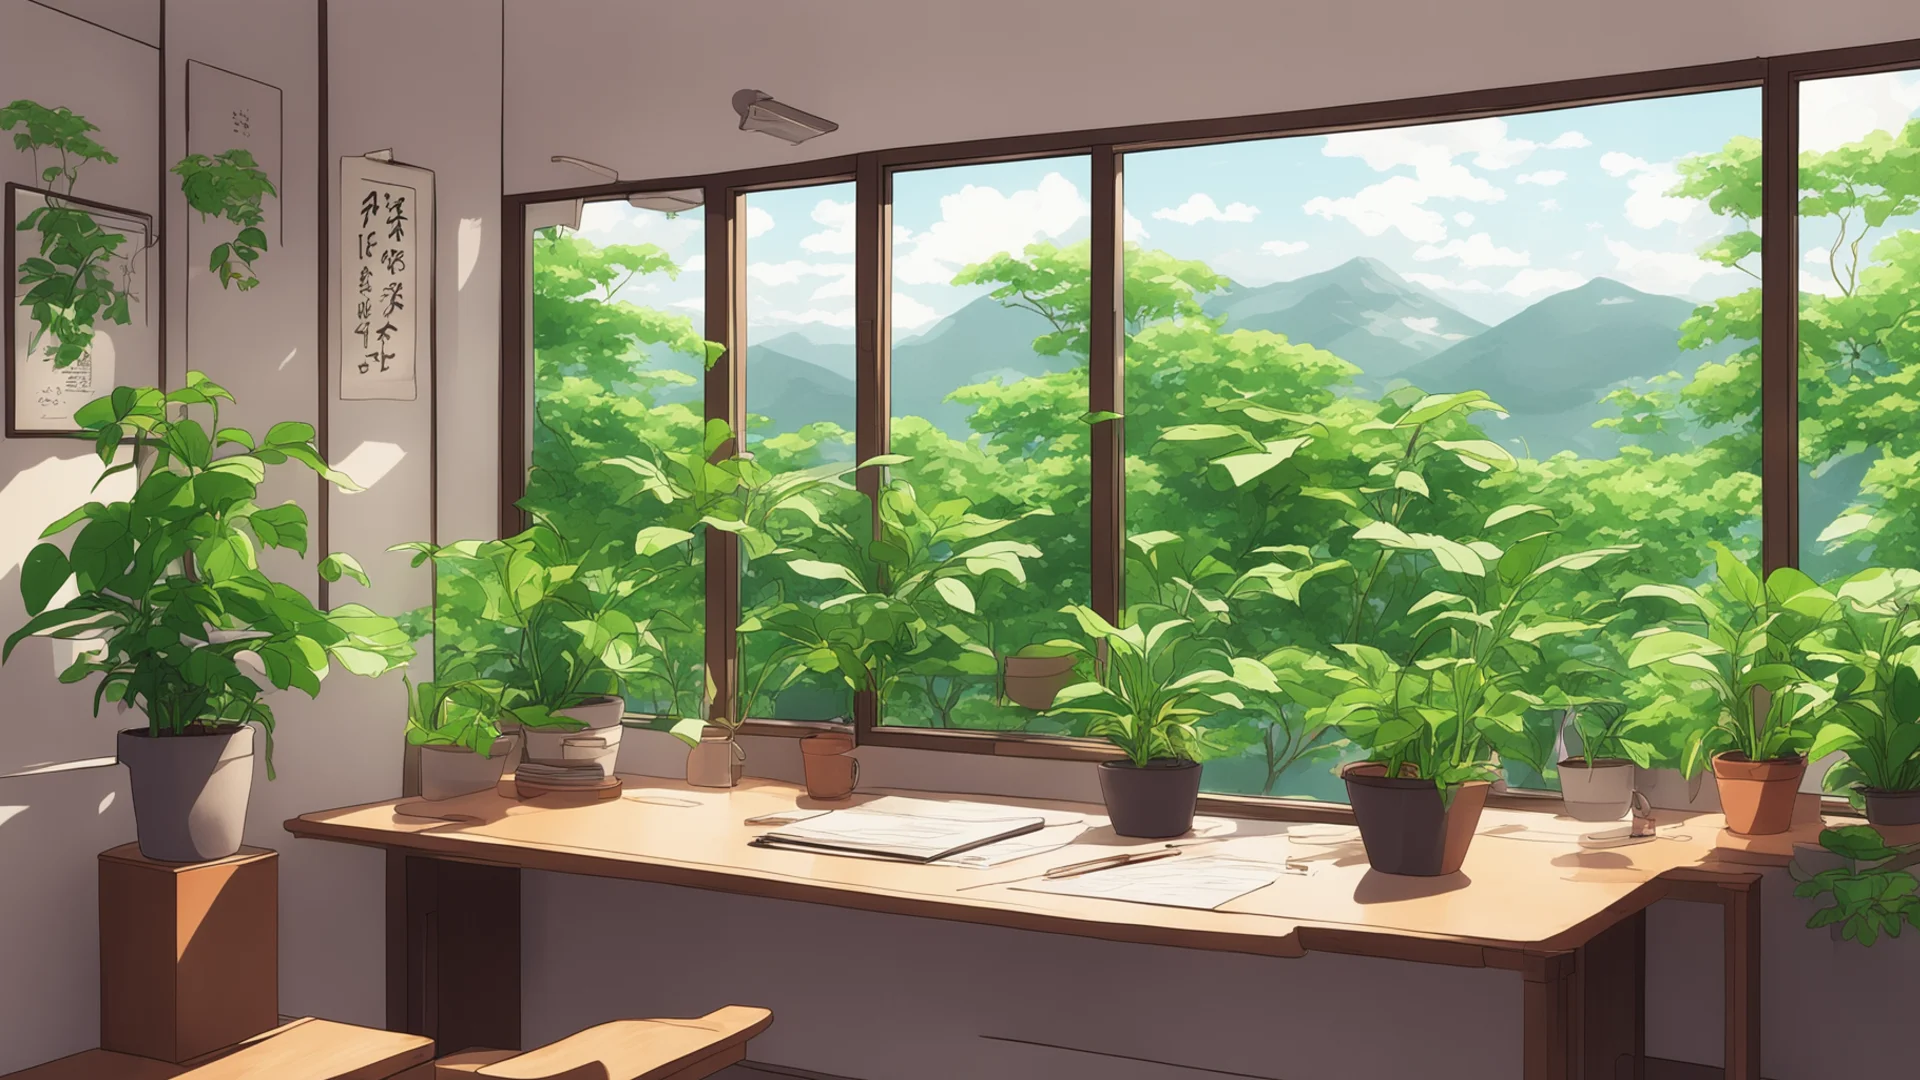 aijapanese interior. window view with a desk. plants on desk anime style. chill cozy room. verdant. amazing awesome portrait 2 wide